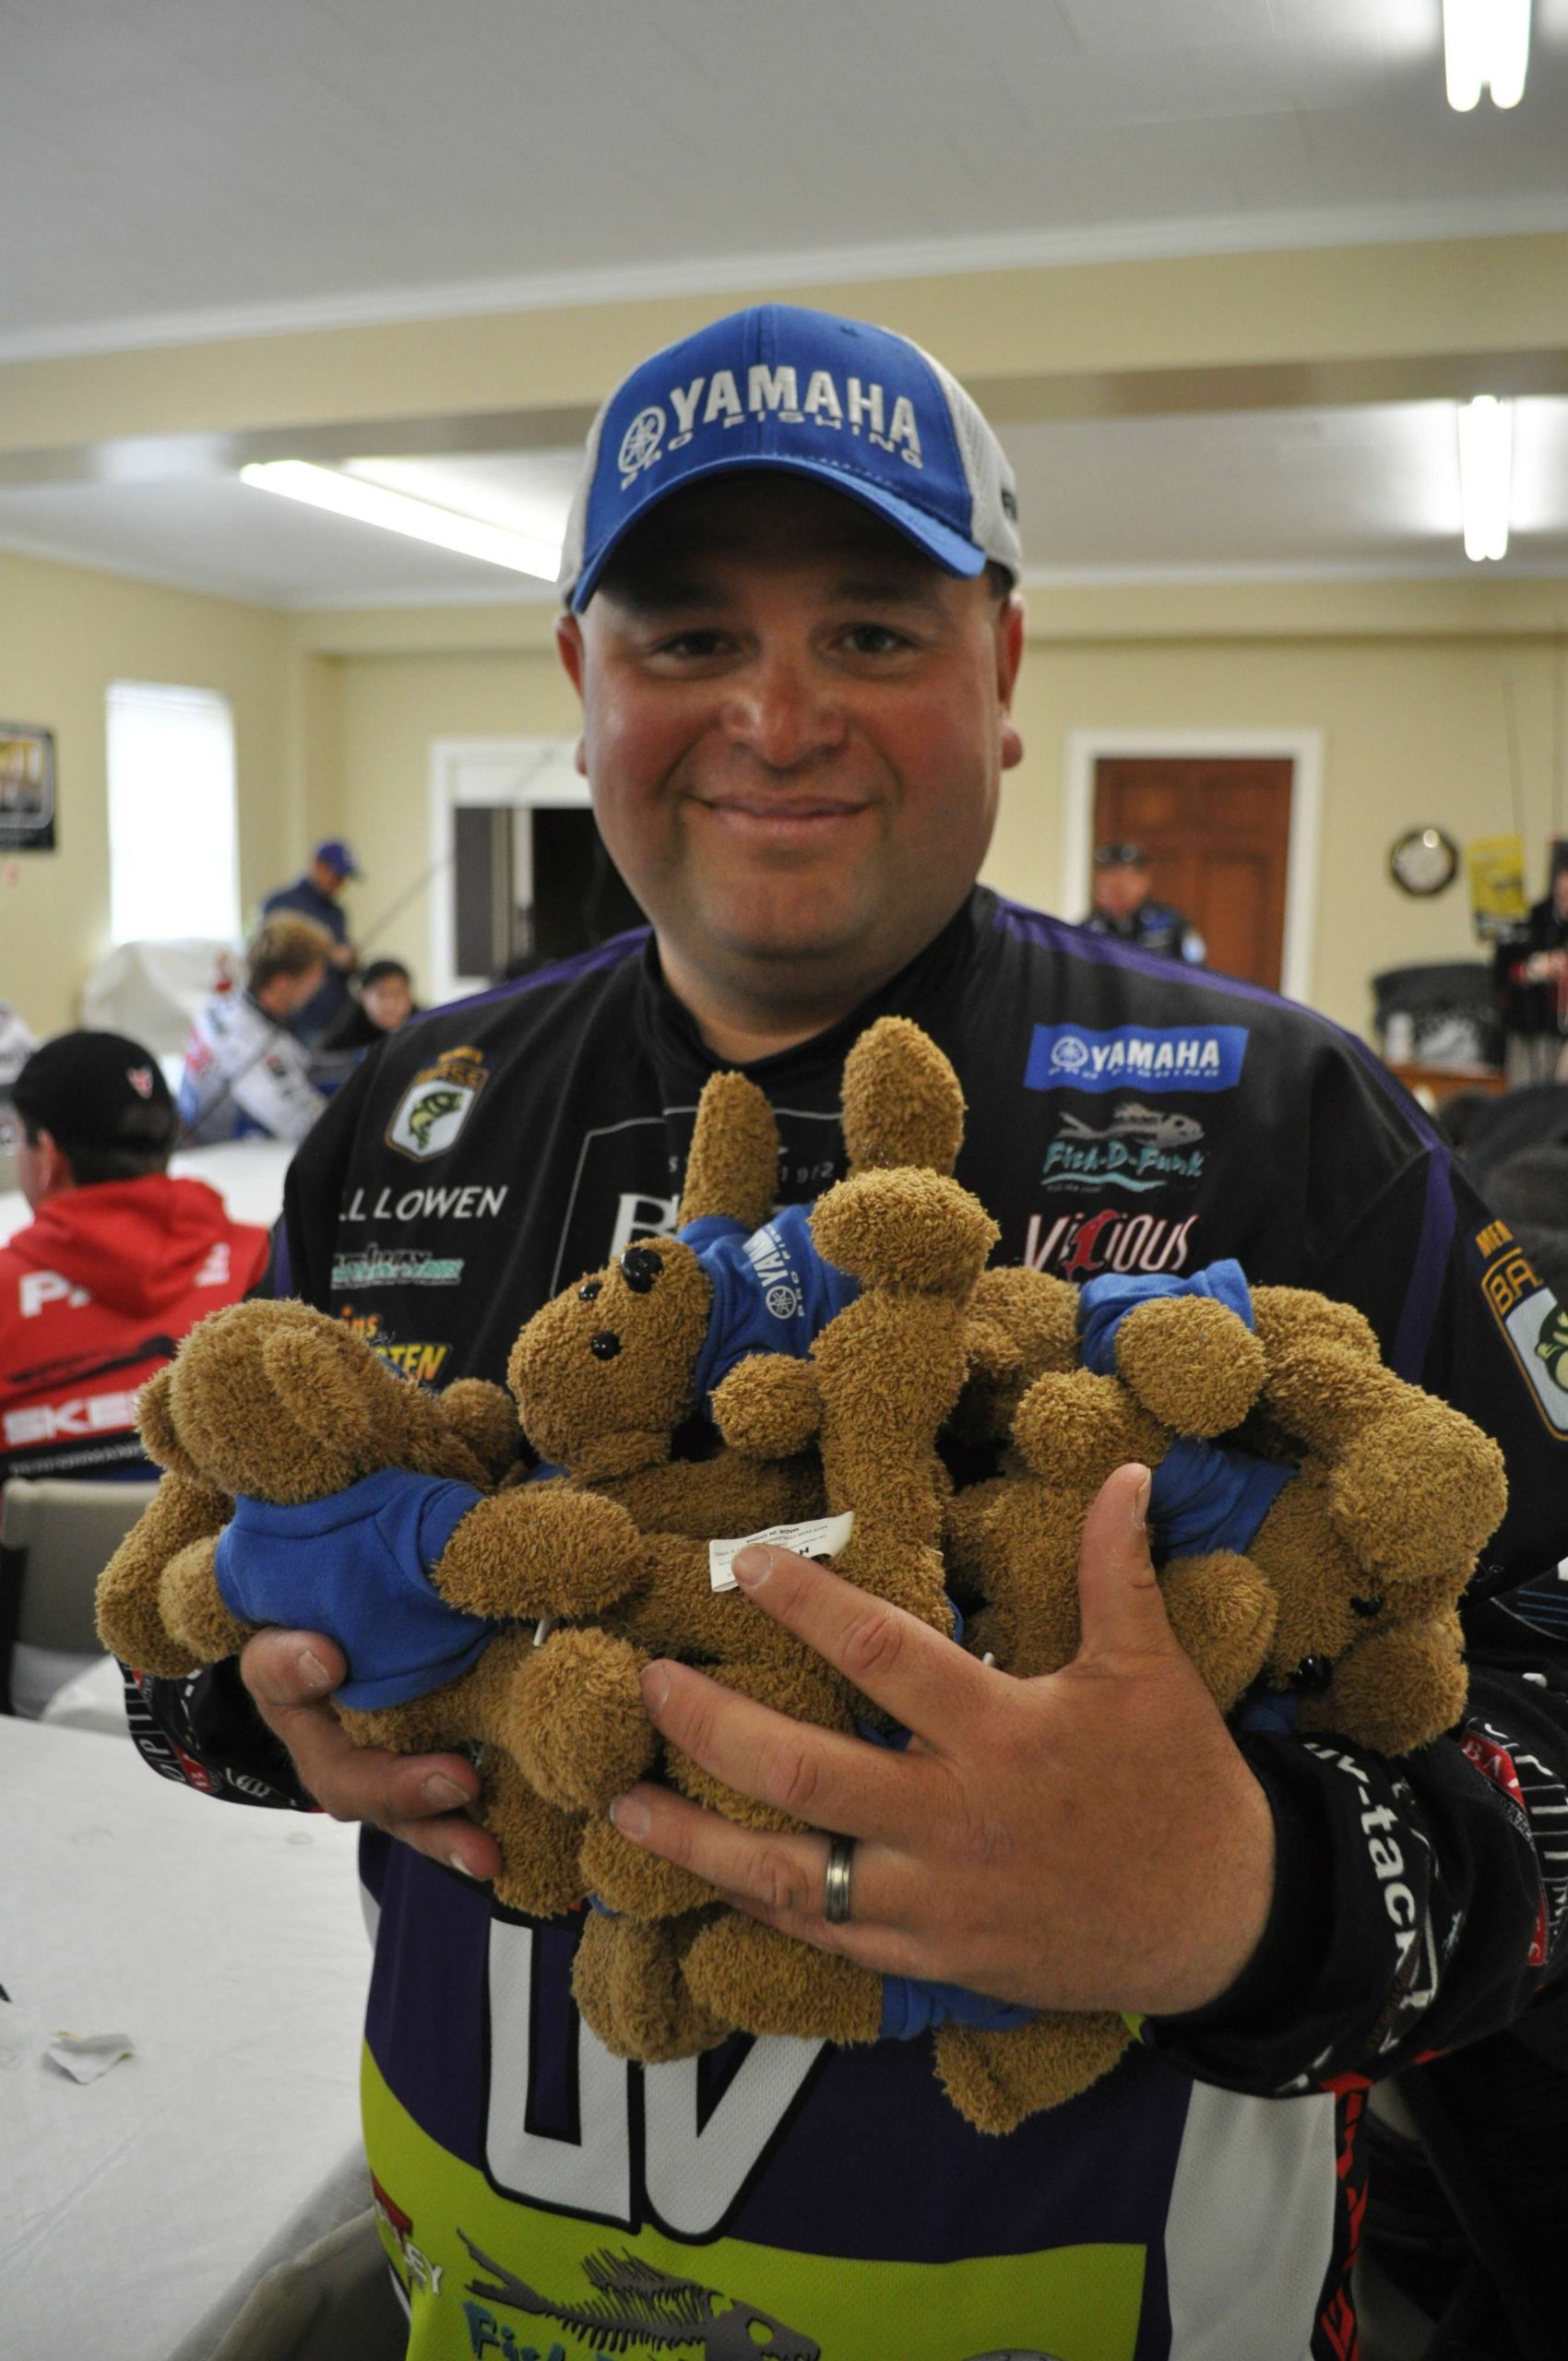 Bill Lowen grabs a handful of Yamaha teddy bears to distribute to the group. 